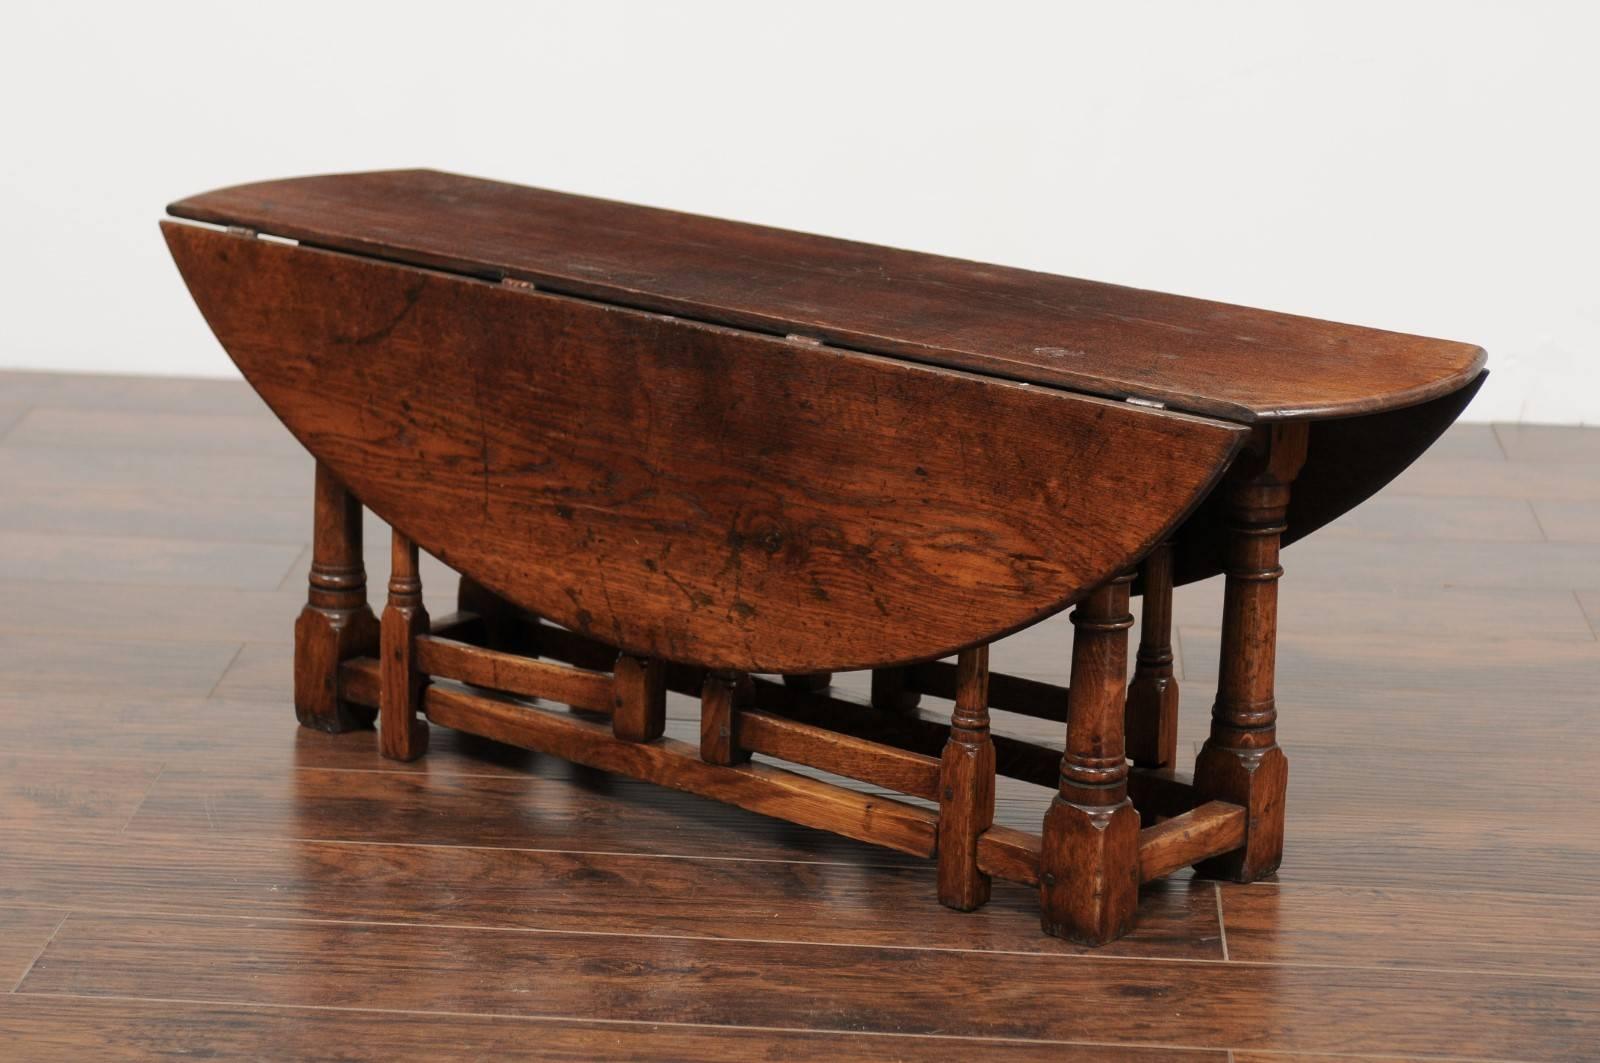 An unusual English oak oval top drop-leaf coffee table with double gateleg from the late 19th century. This English oak table features an oval top made of two drop leaves. The depth of the table when the leaves are down is 12.5